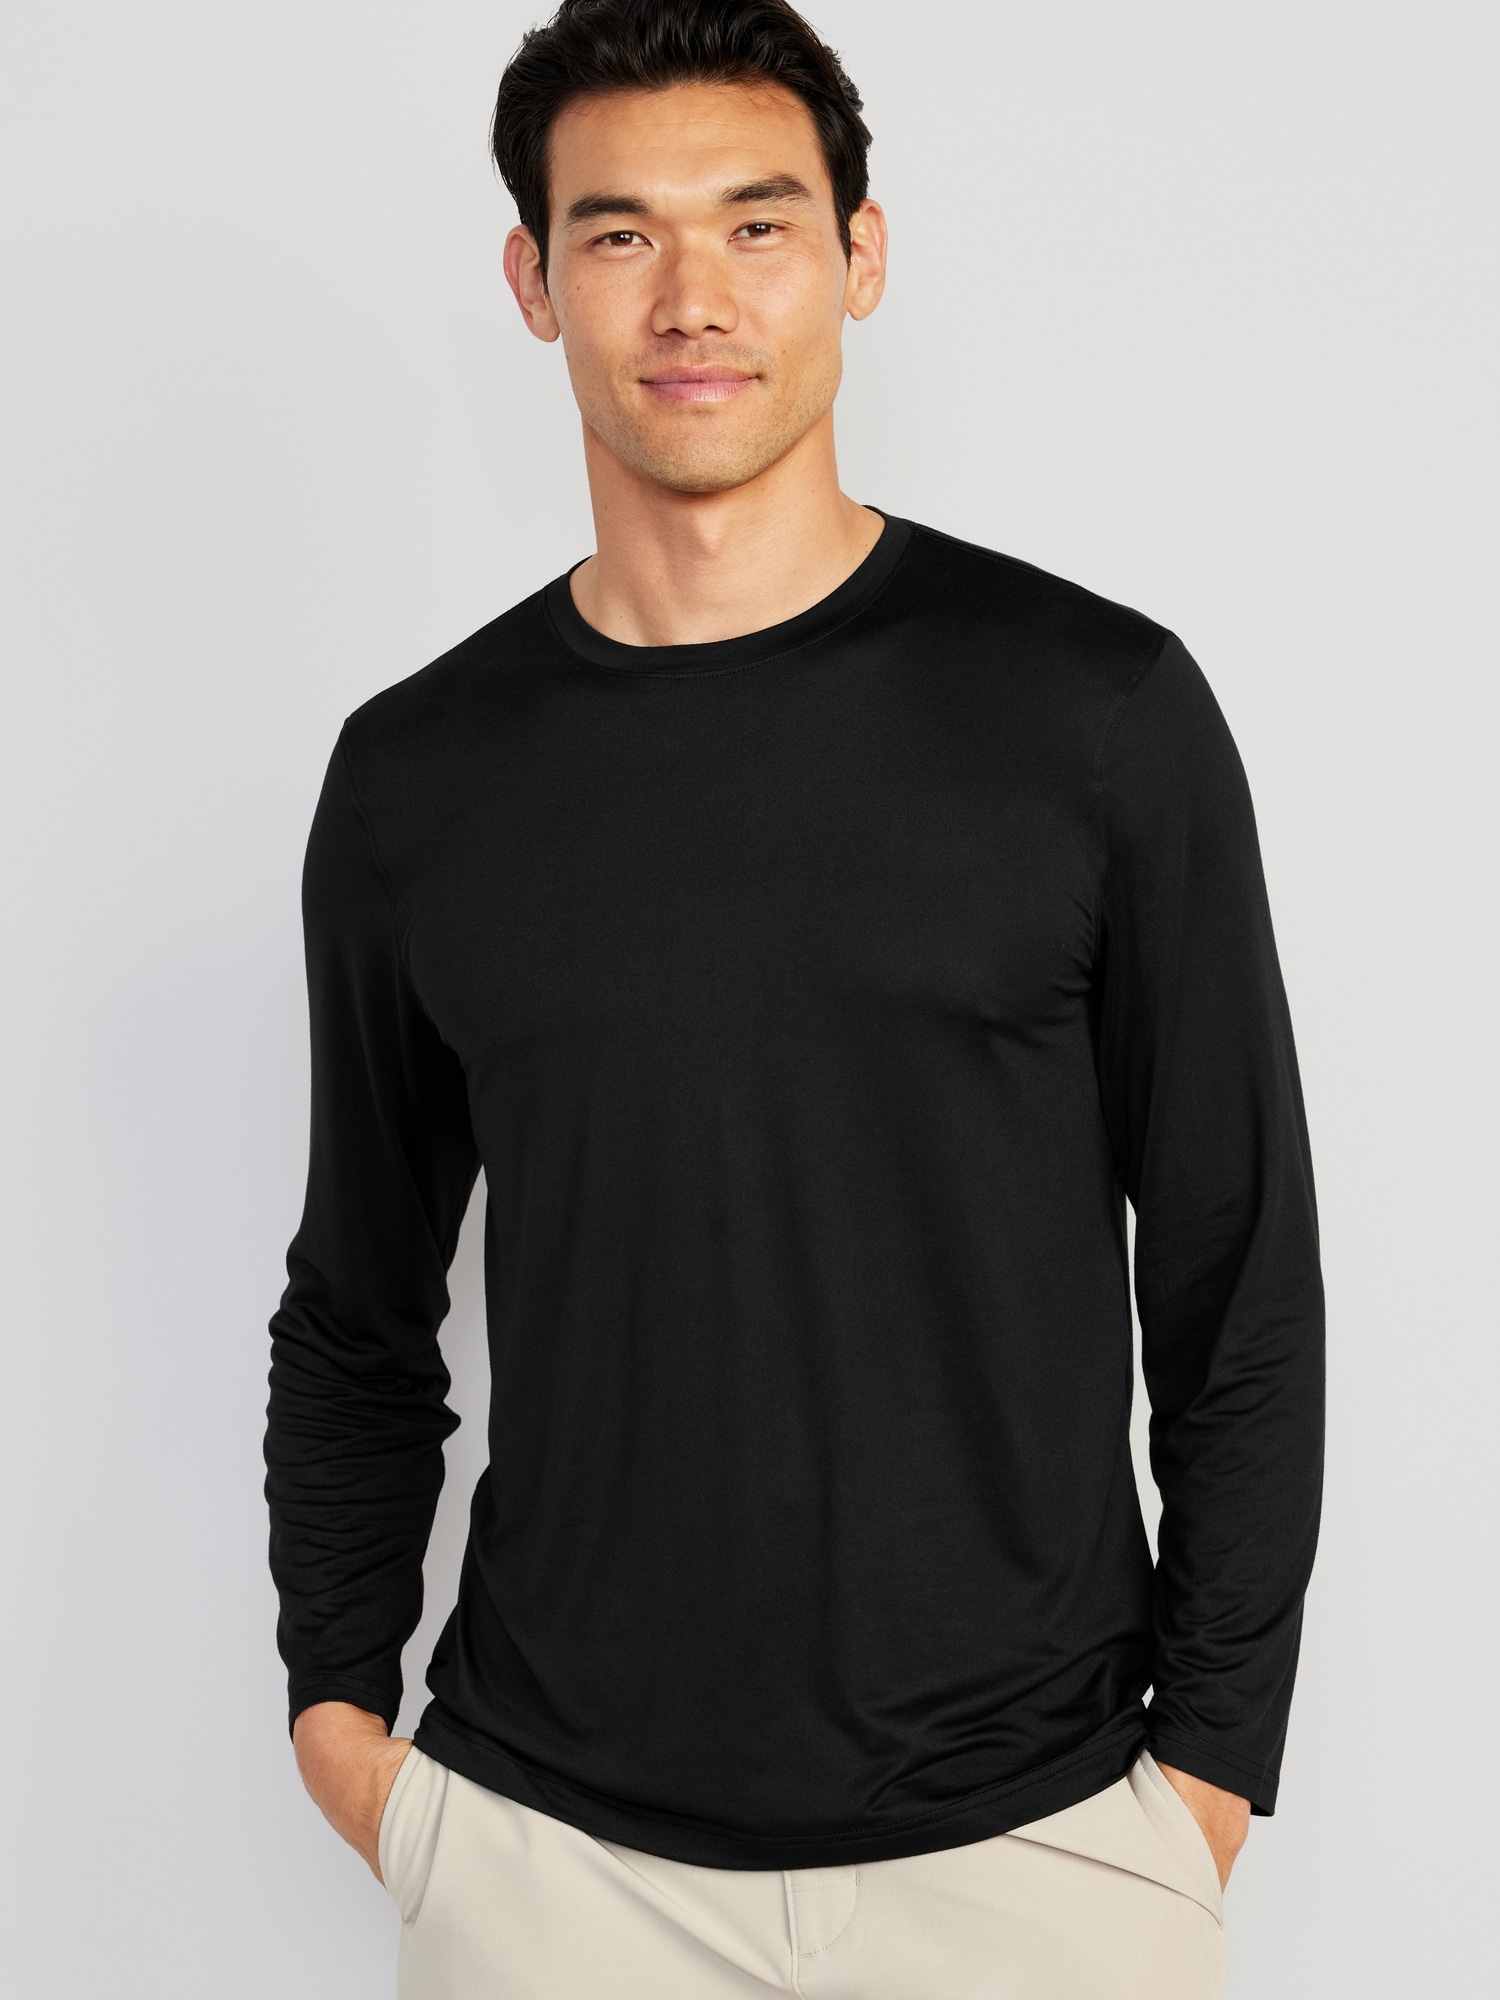 Cloud 94 Soft Long-Sleeve T-Shirt for Men | Old Navy